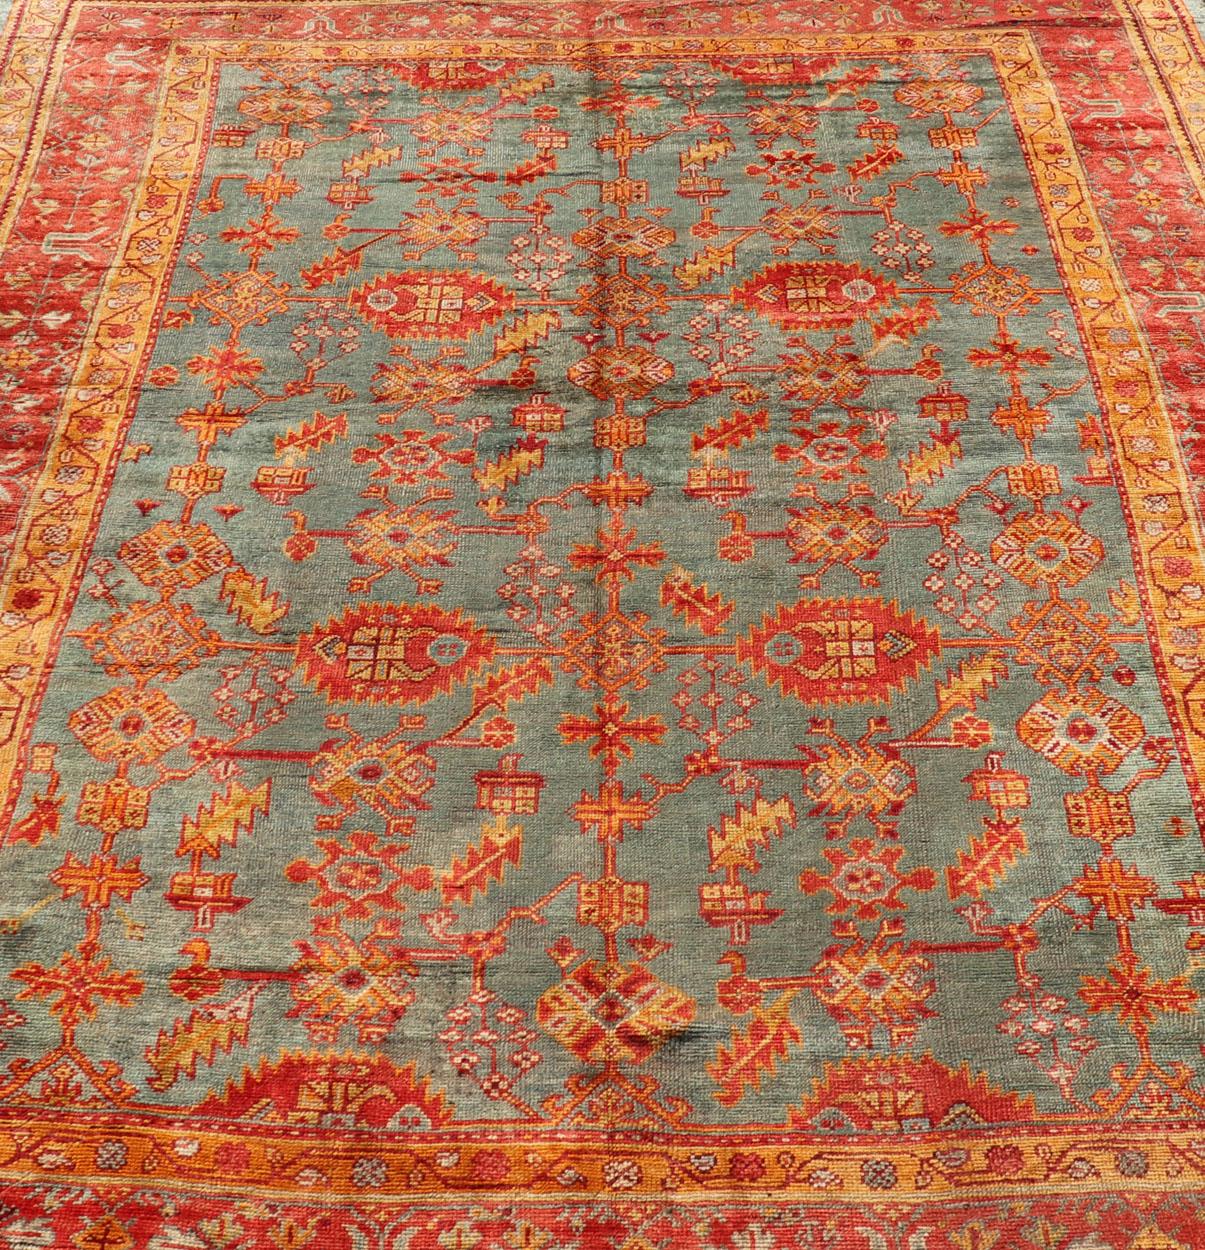 Early 20th Century Antique Turkish Oushak Rug with Flowers and Geometric  In Good Condition For Sale In Atlanta, GA